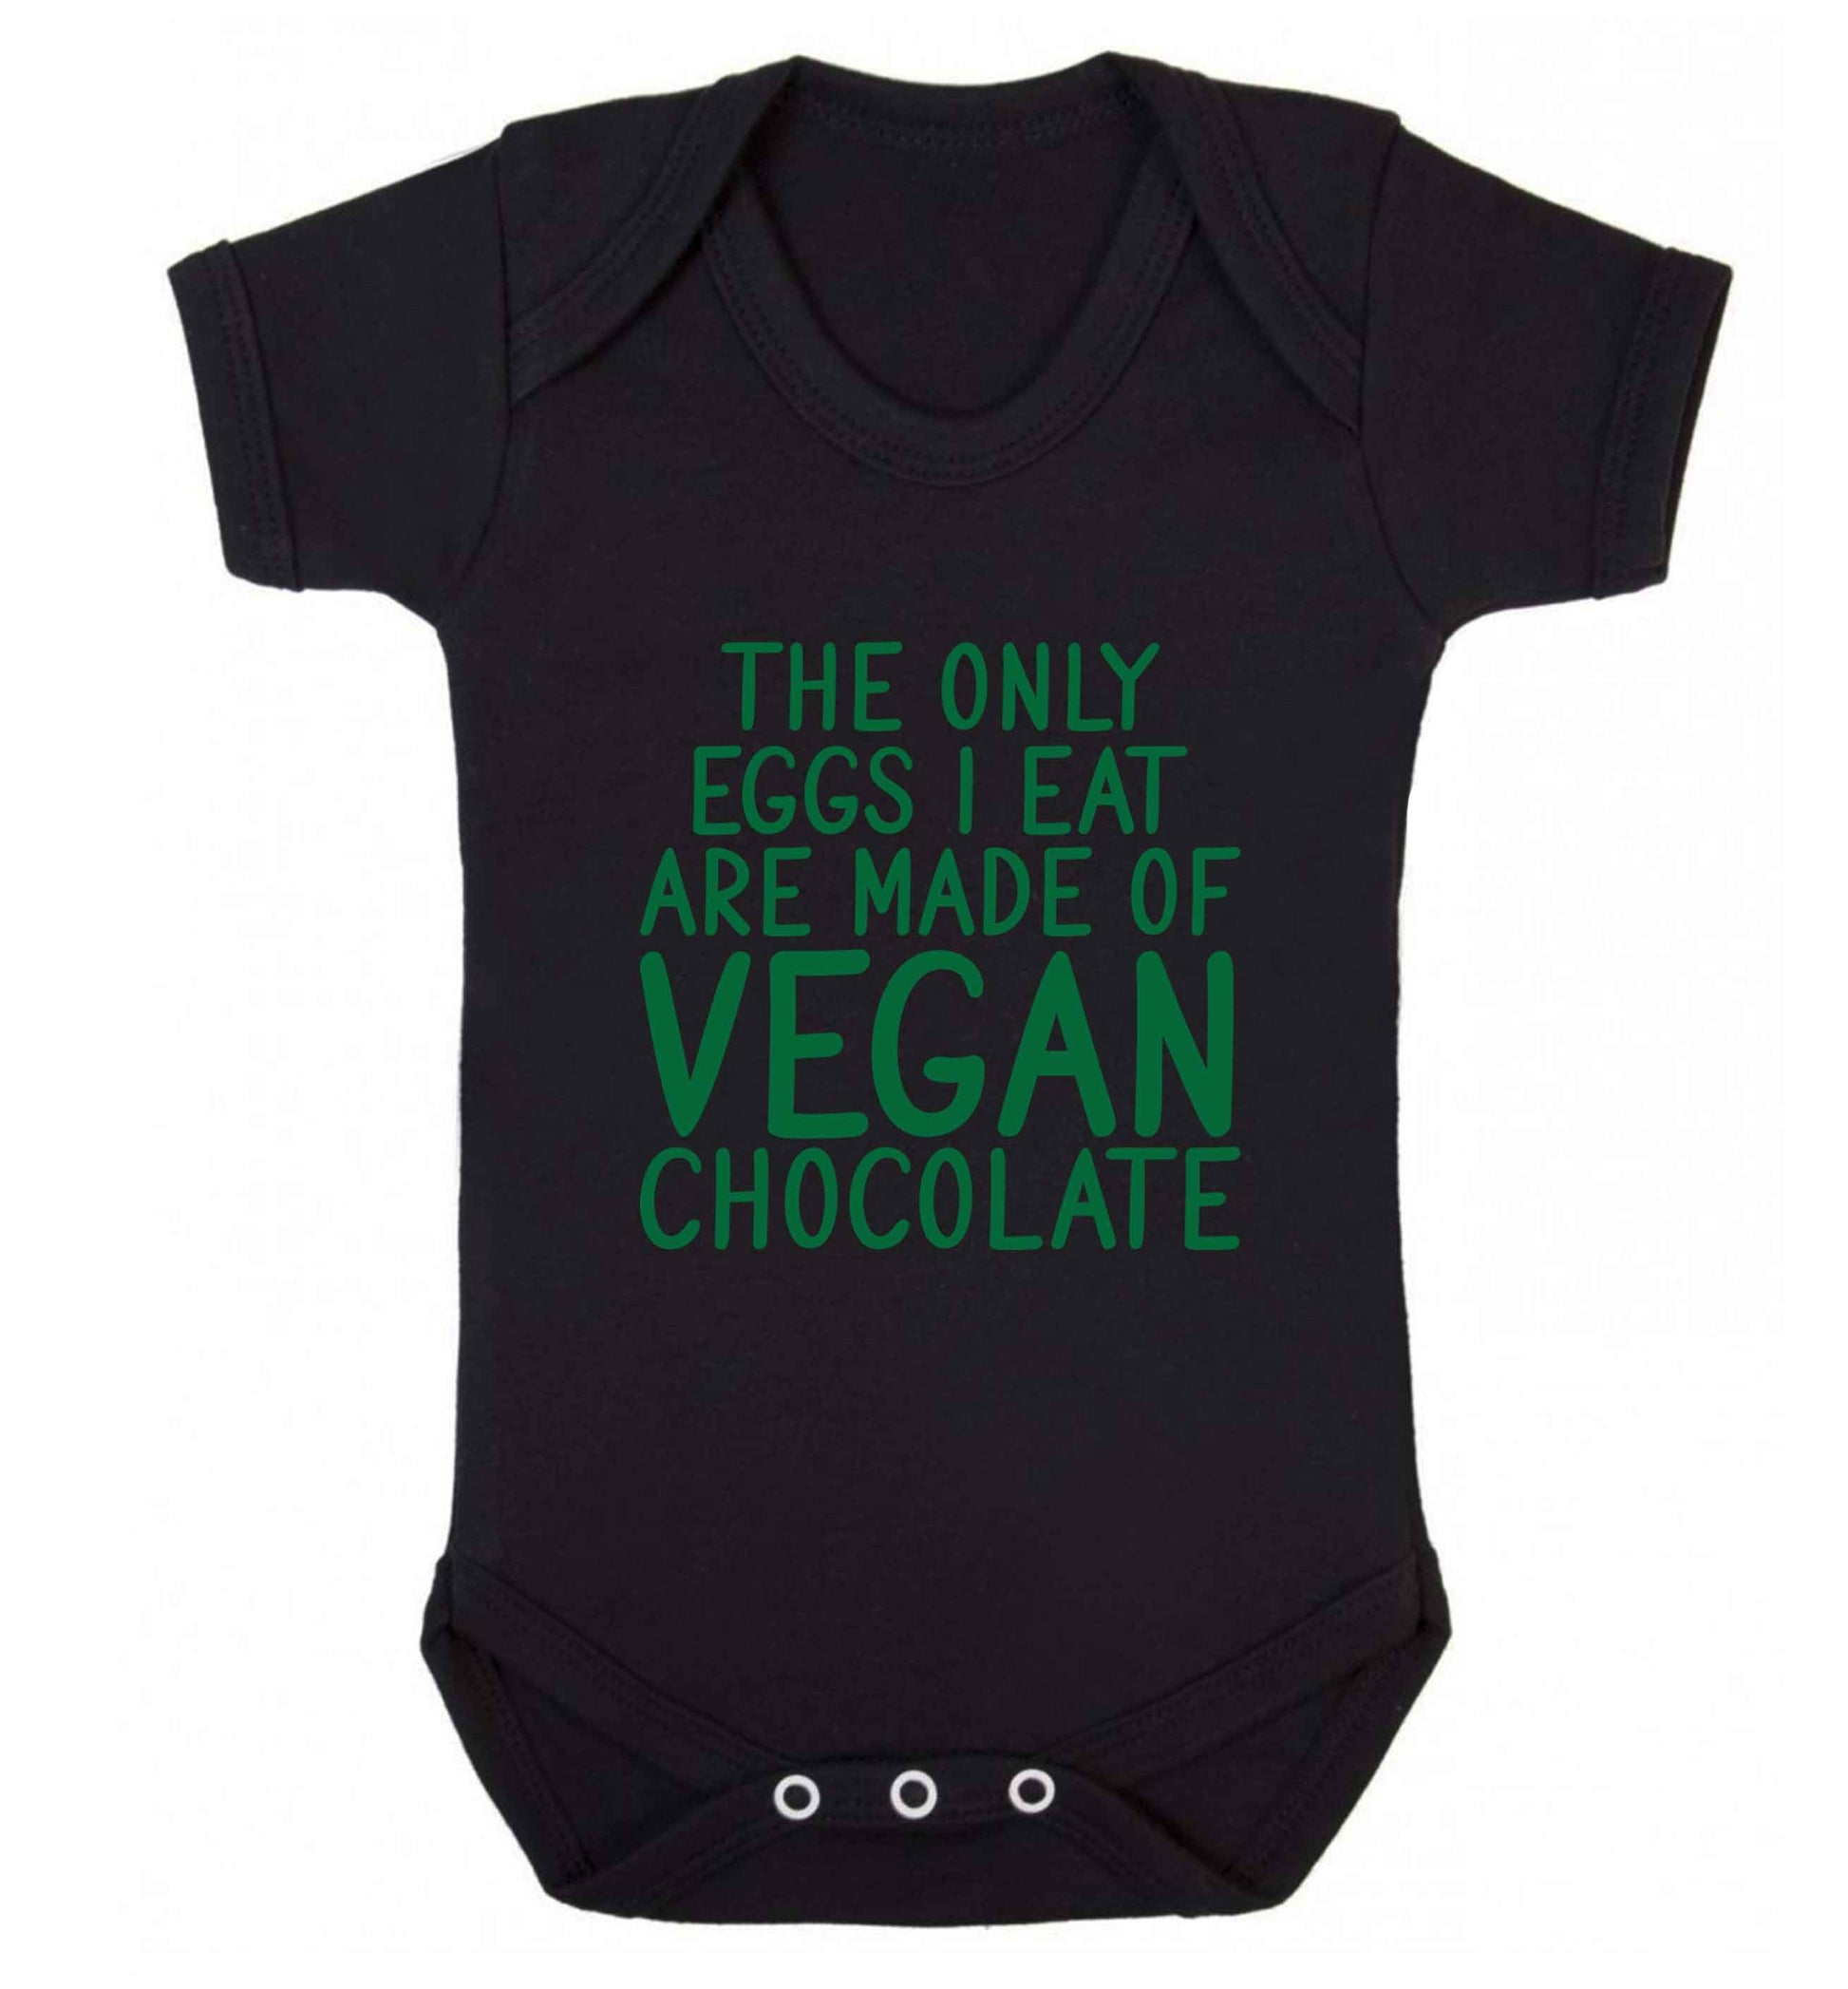 The only eggs I eat are made of vegan chocolate baby vest black 18-24 months